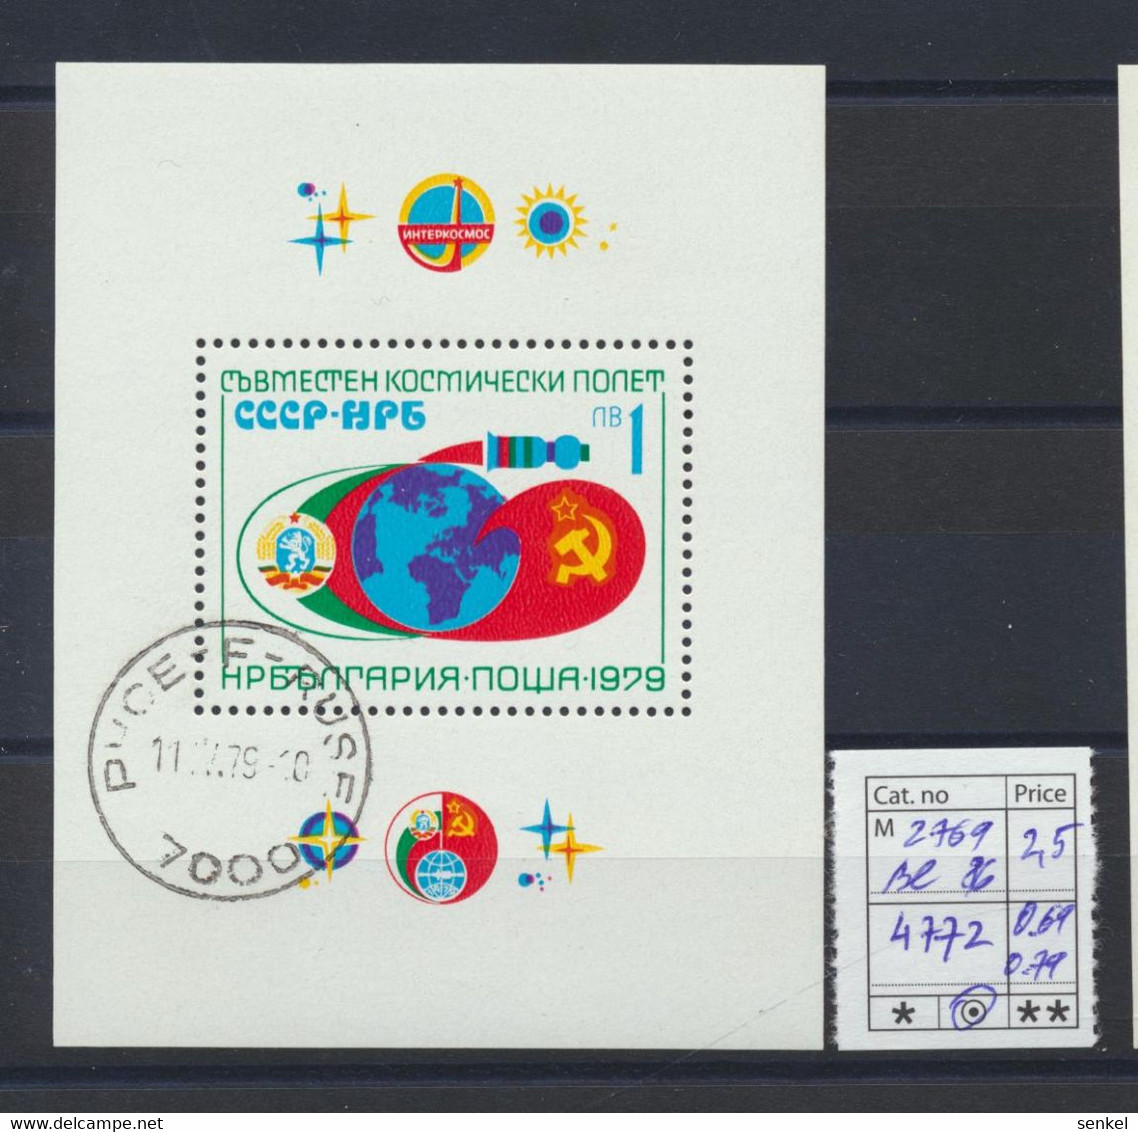 4759 - 4773 Bulgaria 1979 different stamps olympics painting TV art cosmos